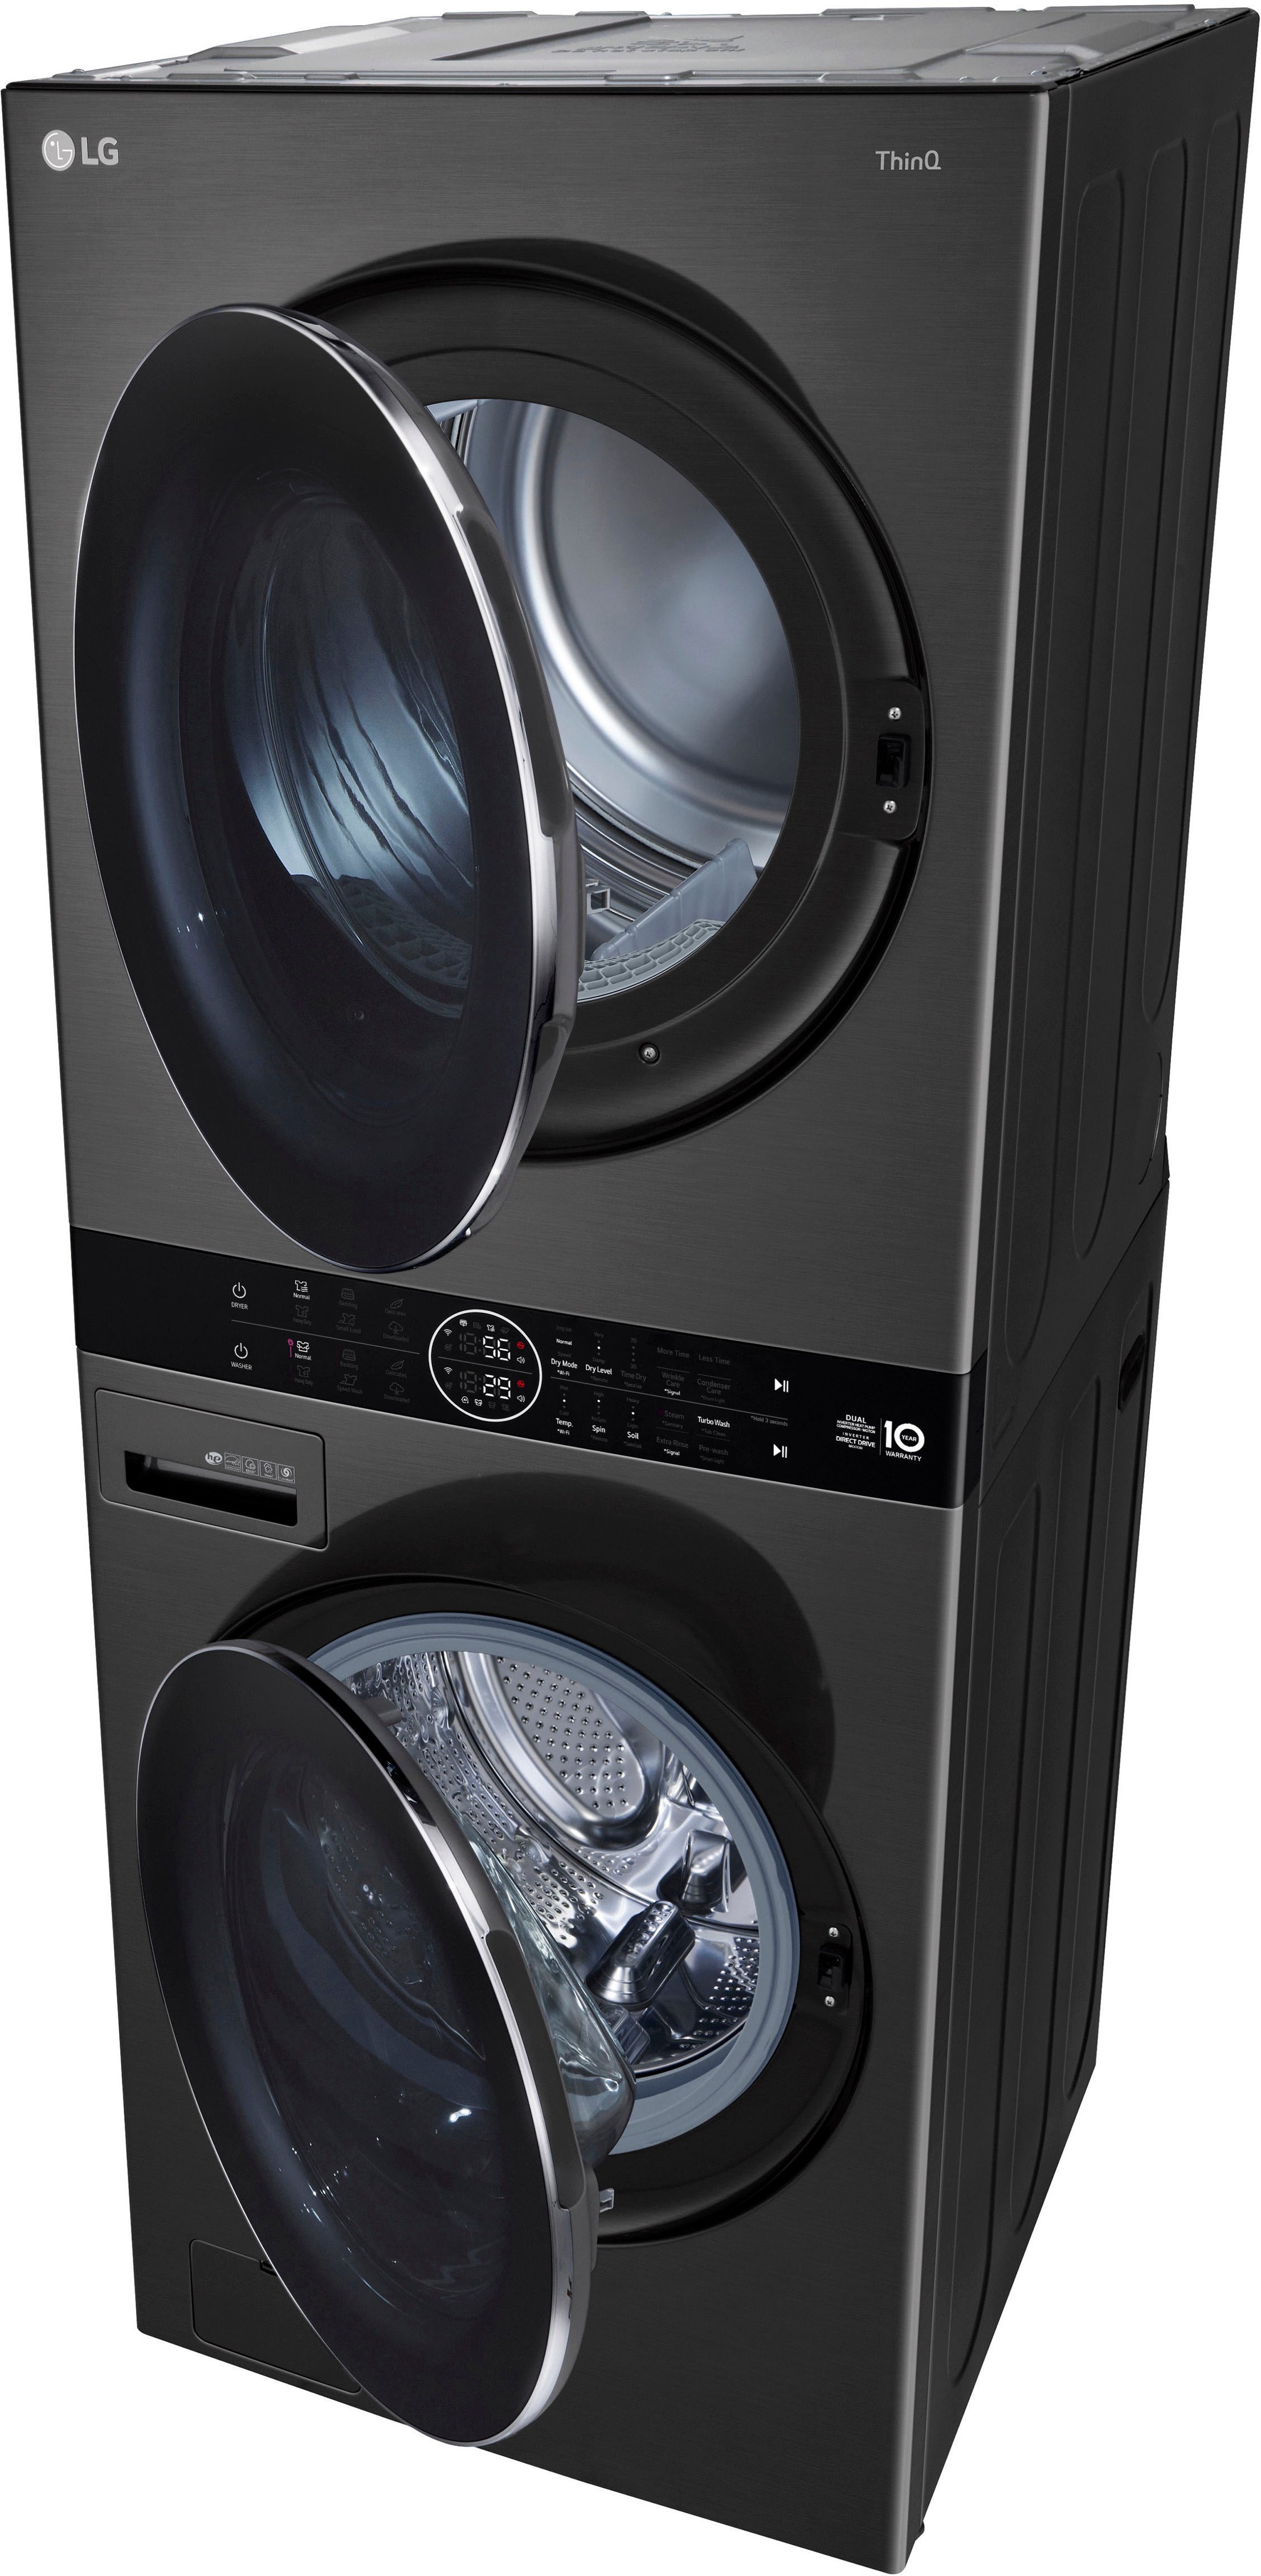 WKHC202HBA WashTower Washer Cu. Dryer HE Front Buy Black - Ft. Ventless Steel Best Cu. Ft. Smart 4.5 with 7.4 and LG Dryer Electric and Steam Load